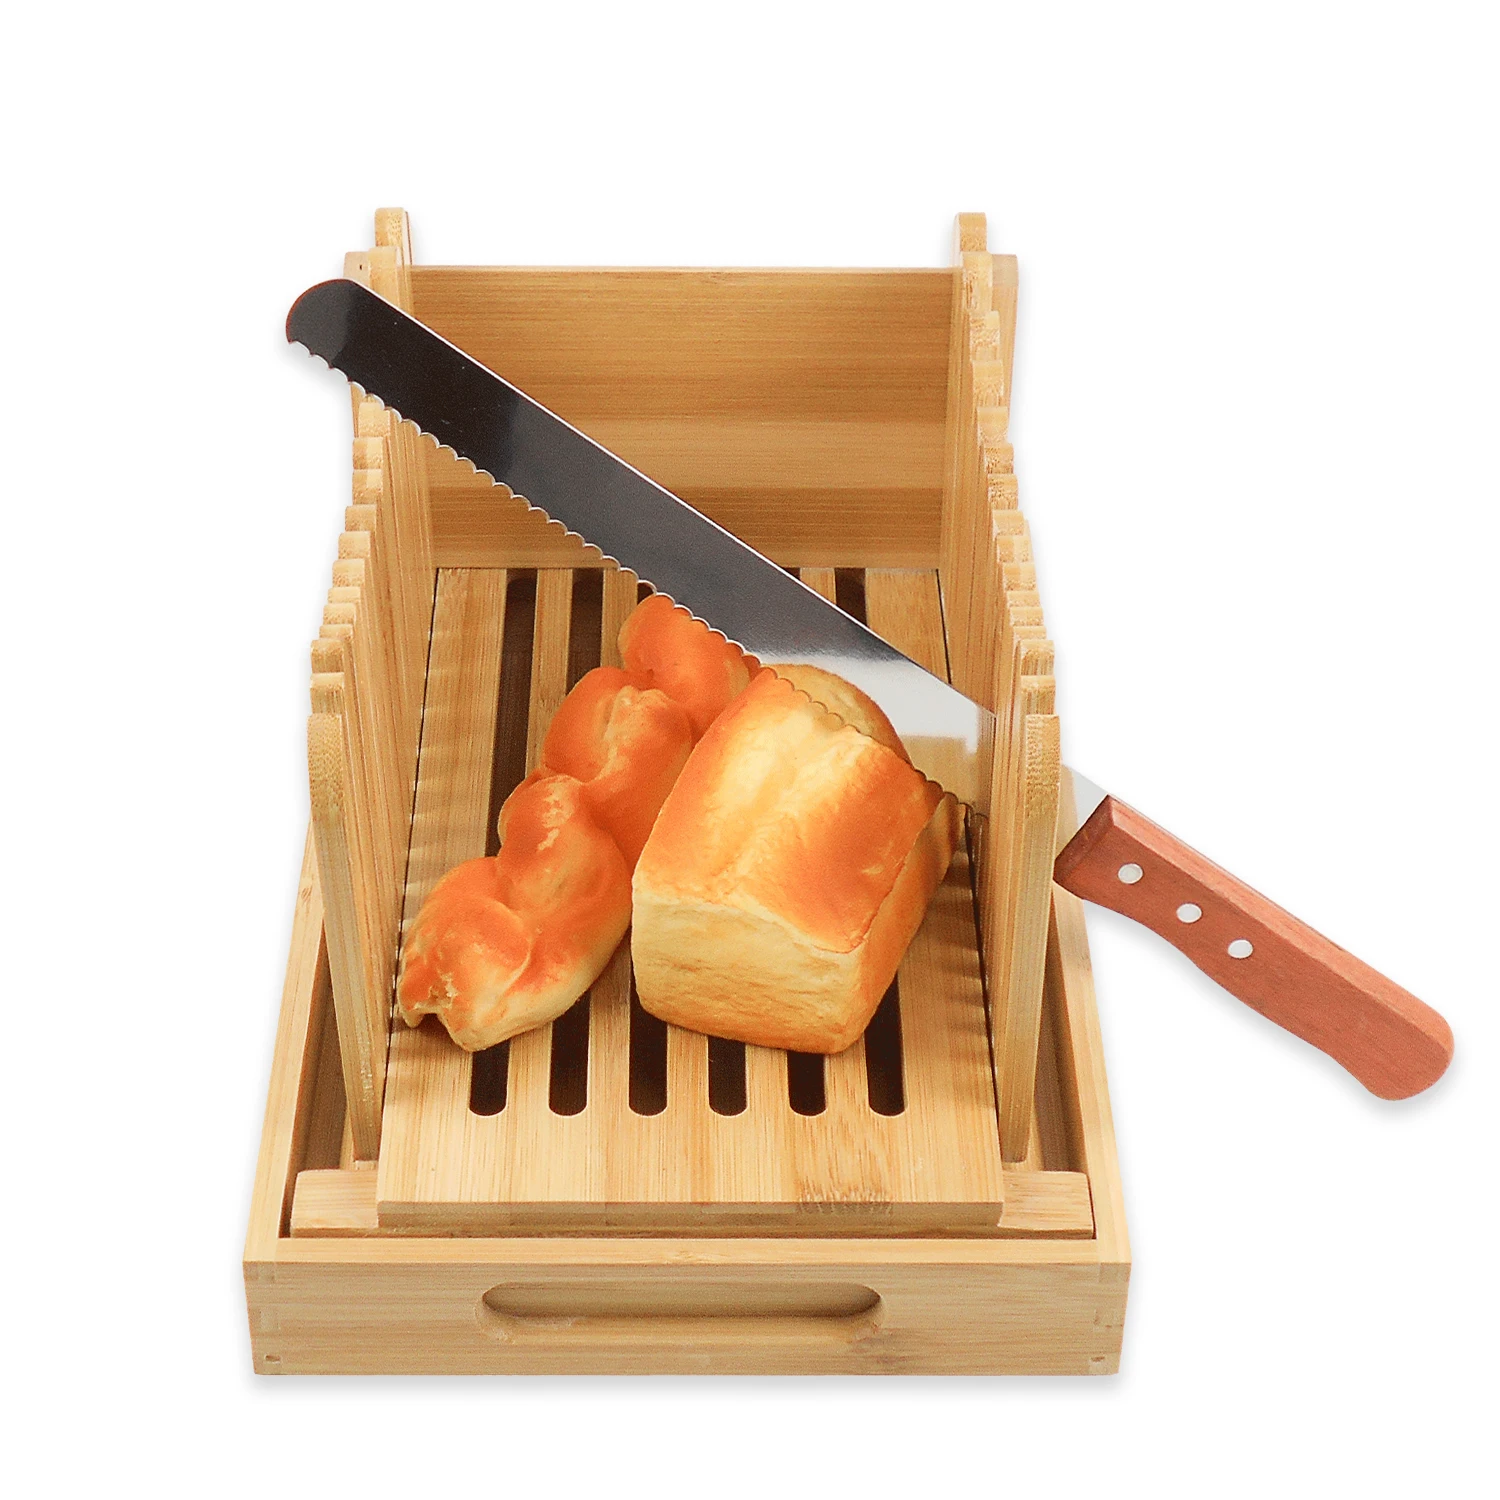 

Hot Sale Bamboo Foldable Manual Bread Slicer With Crumb Catcher Tray